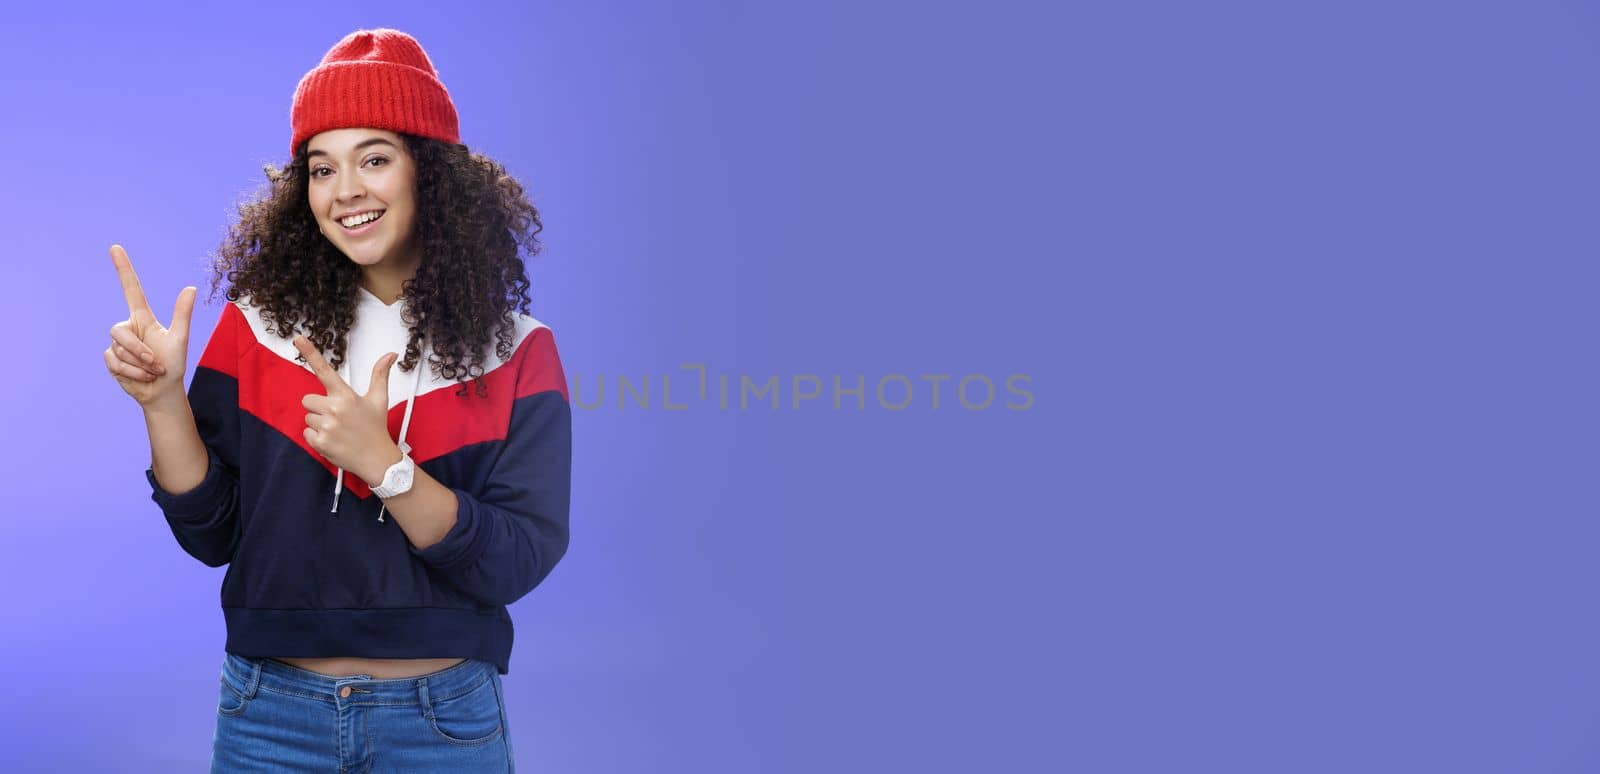 Lifestyle. Portrait of friendly good-looking woman with curly hair in red warm beanie pointing at upper left corner and smiling delighted as promoting cool copy space against blue background.